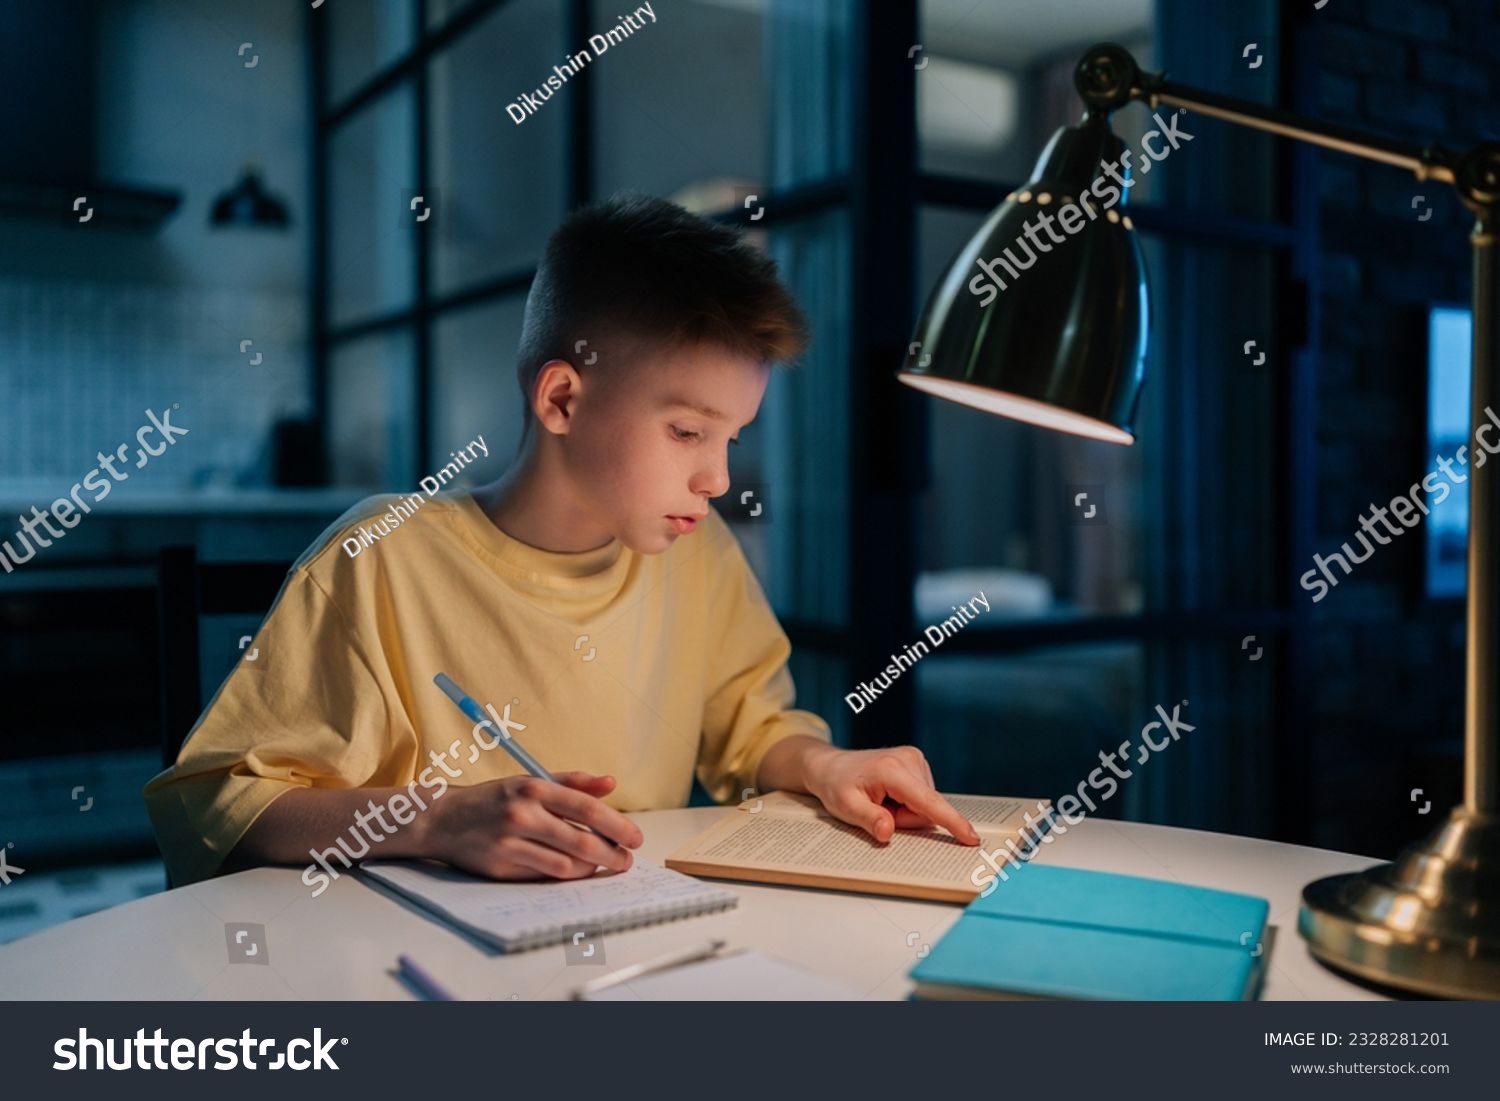 Focused redhead pupil student boy studying at home writing in exercise book doing homework, learning sitting at table under light of lamp at night. Clever schoolkid reading textbook sitting at desk. #2328281201